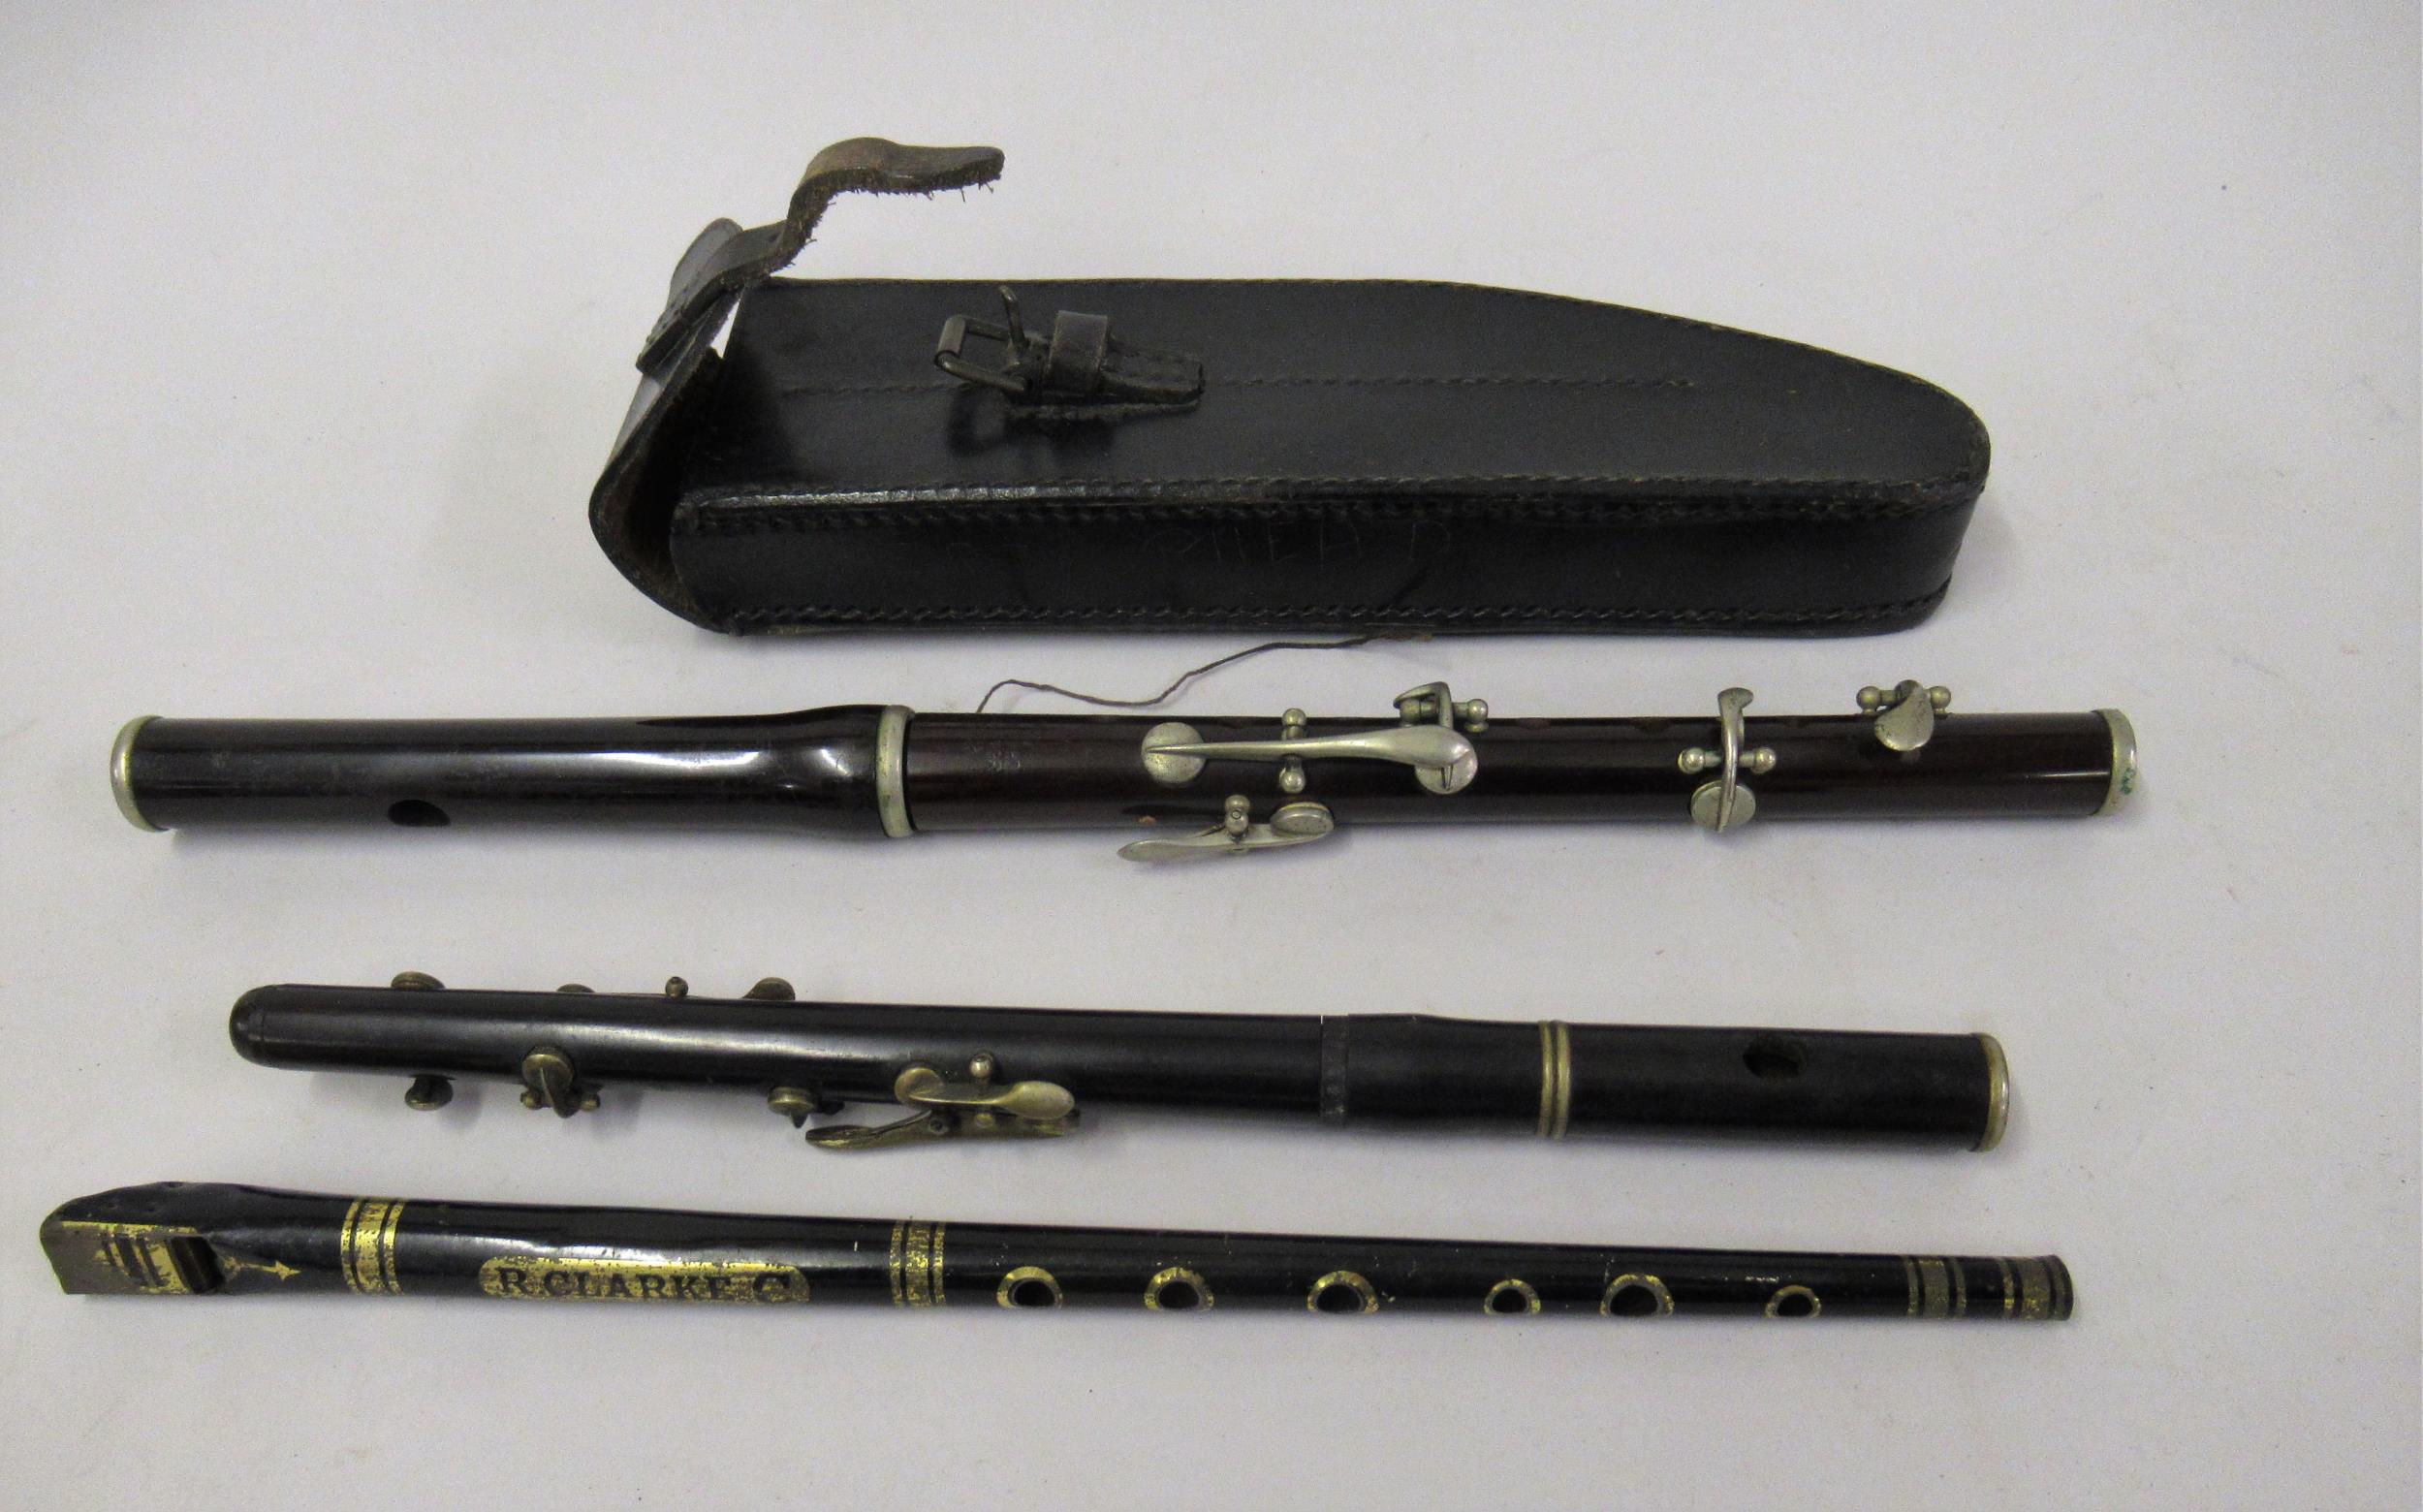 Early 20th Century fife with nickel plated mounts by Potter of London, in a leather case together